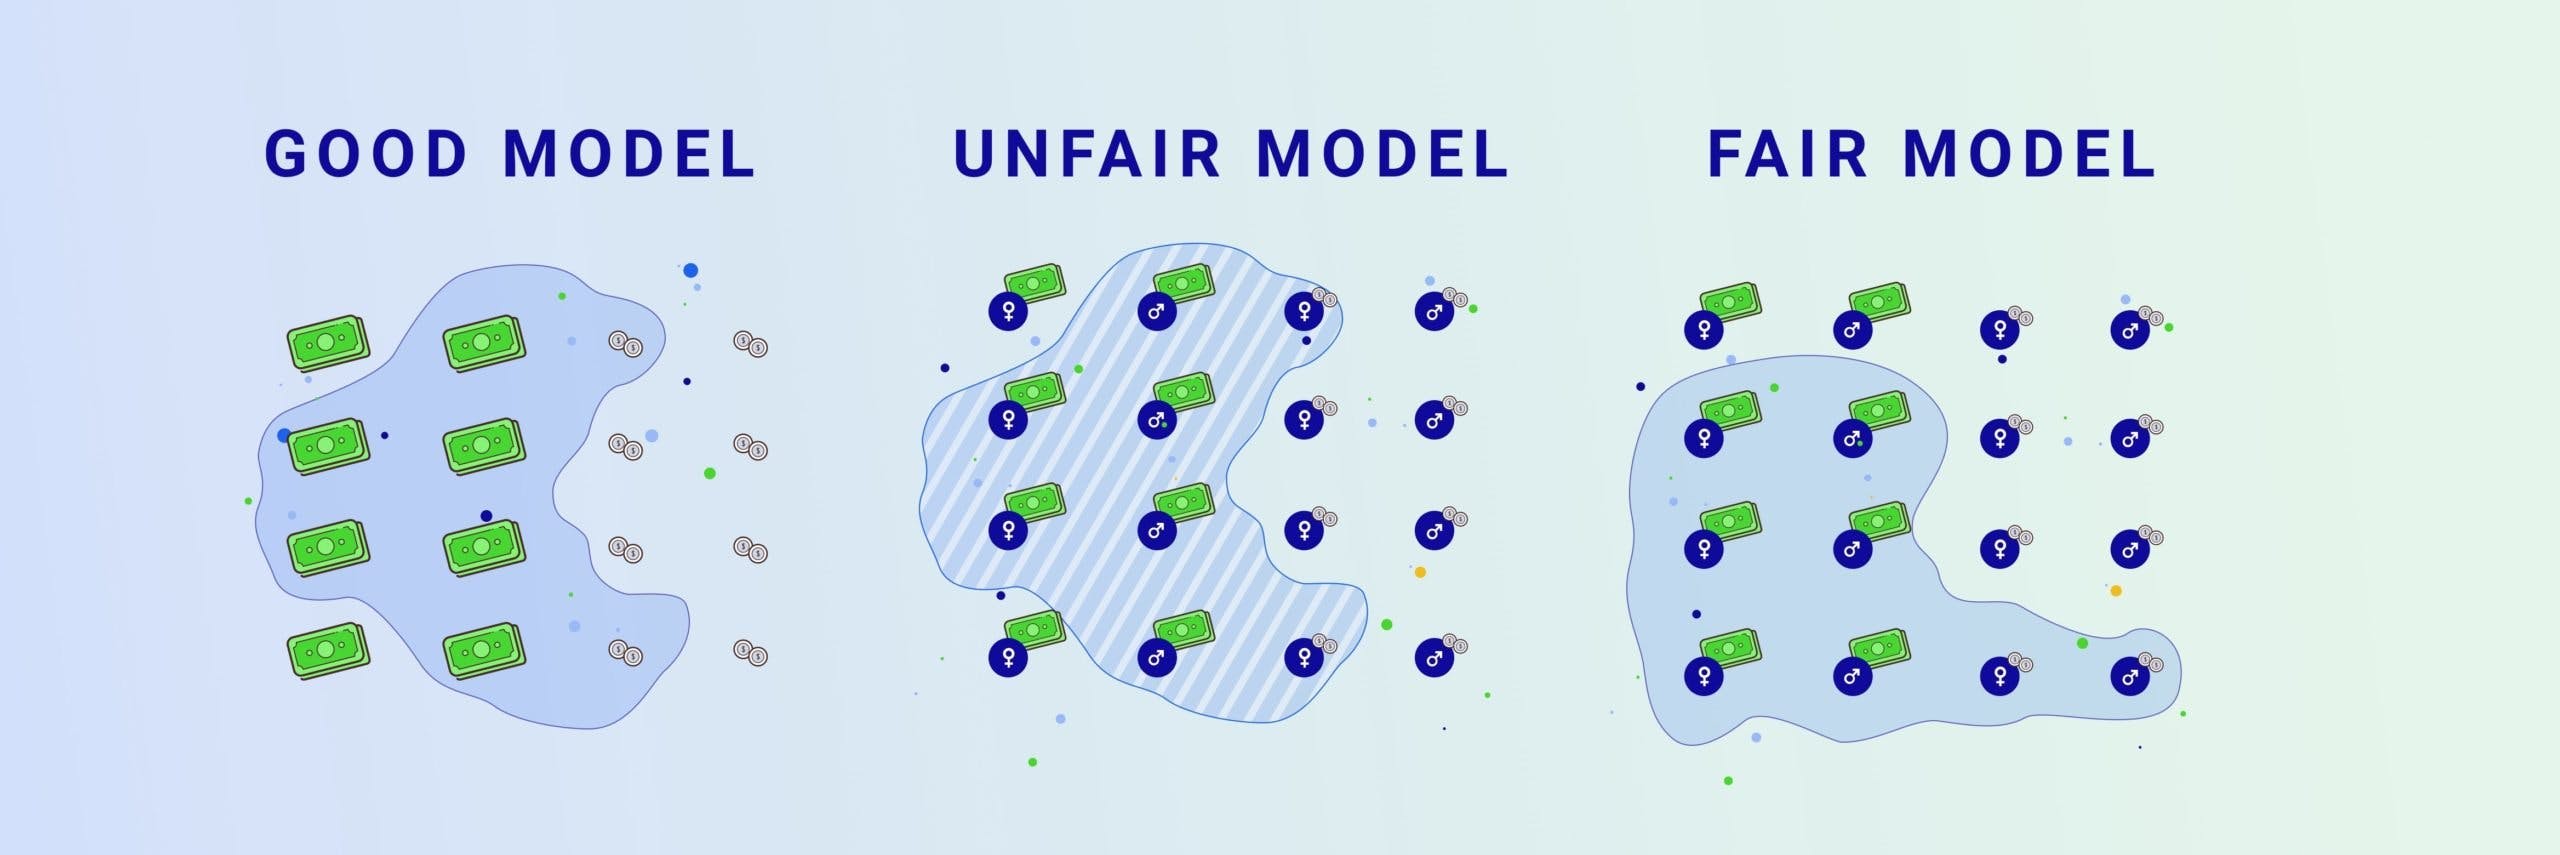 Ensuring fairness in machine learning is important but not straightforward.